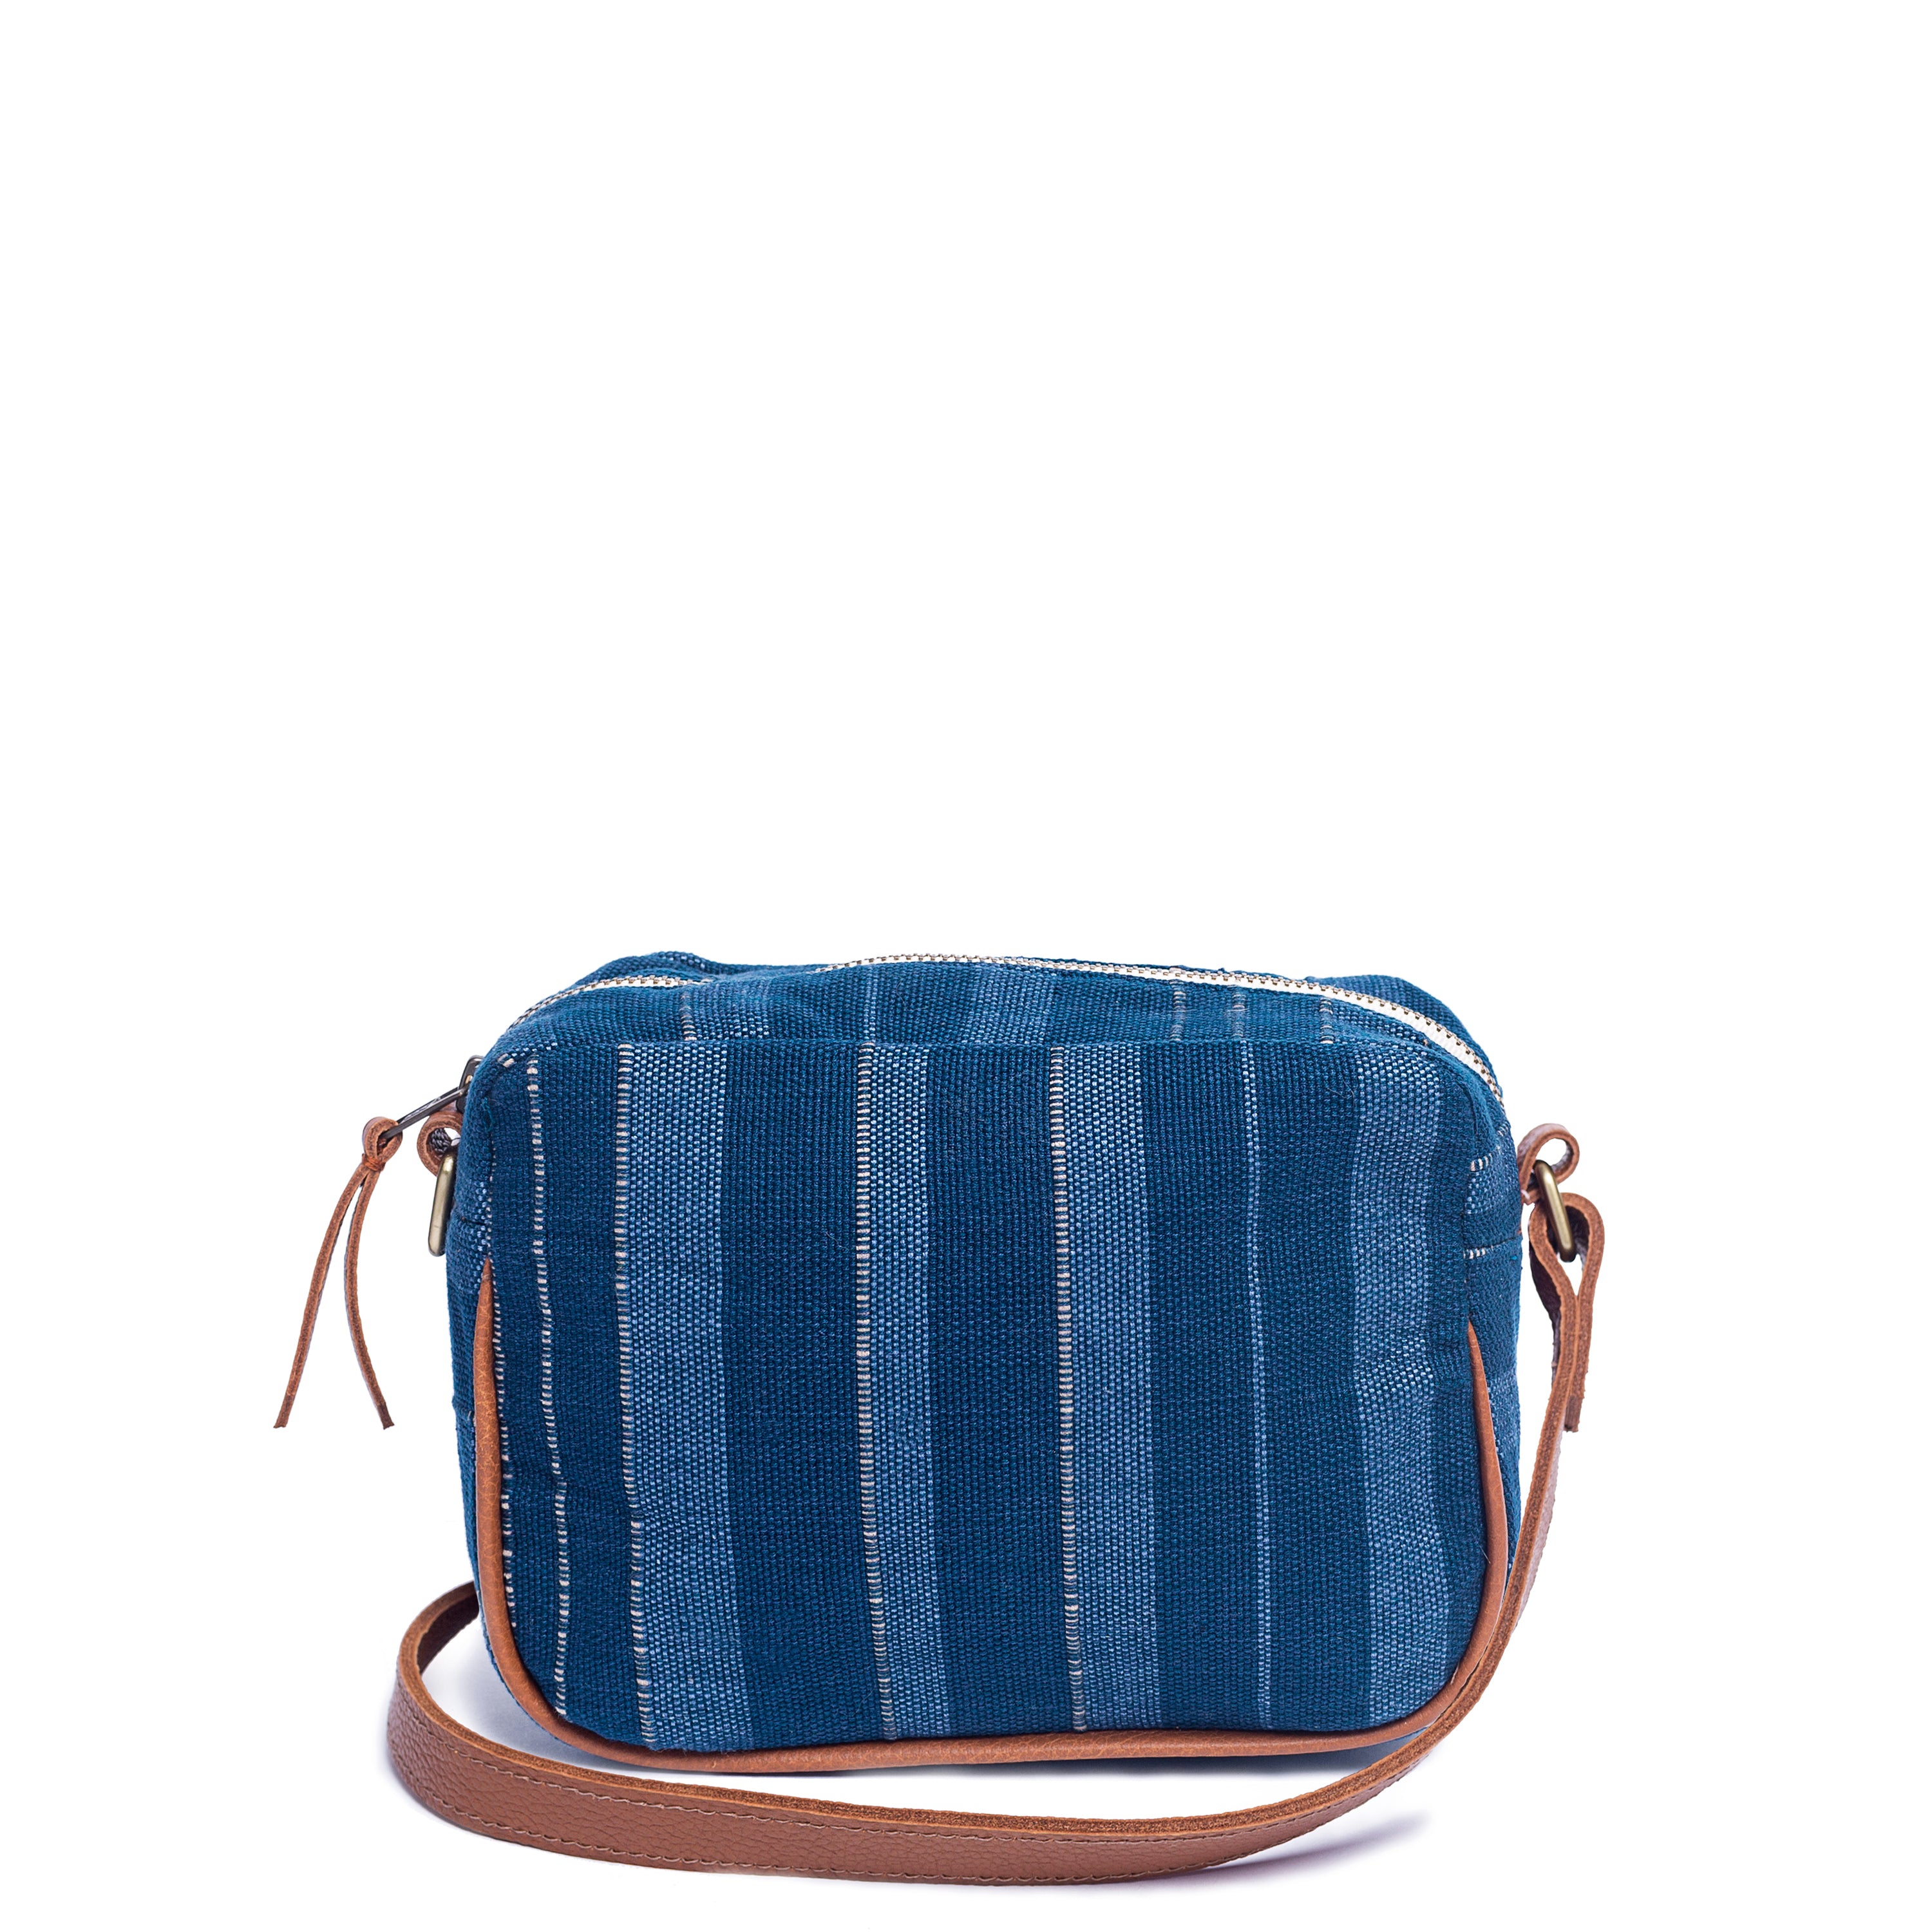 Juana Handwoven Crossbody Sky Haze. The Sky Haze pattern has vertical dark blue, lighter blue, and grey stripes. It has a leather vein detailing and leather strap.